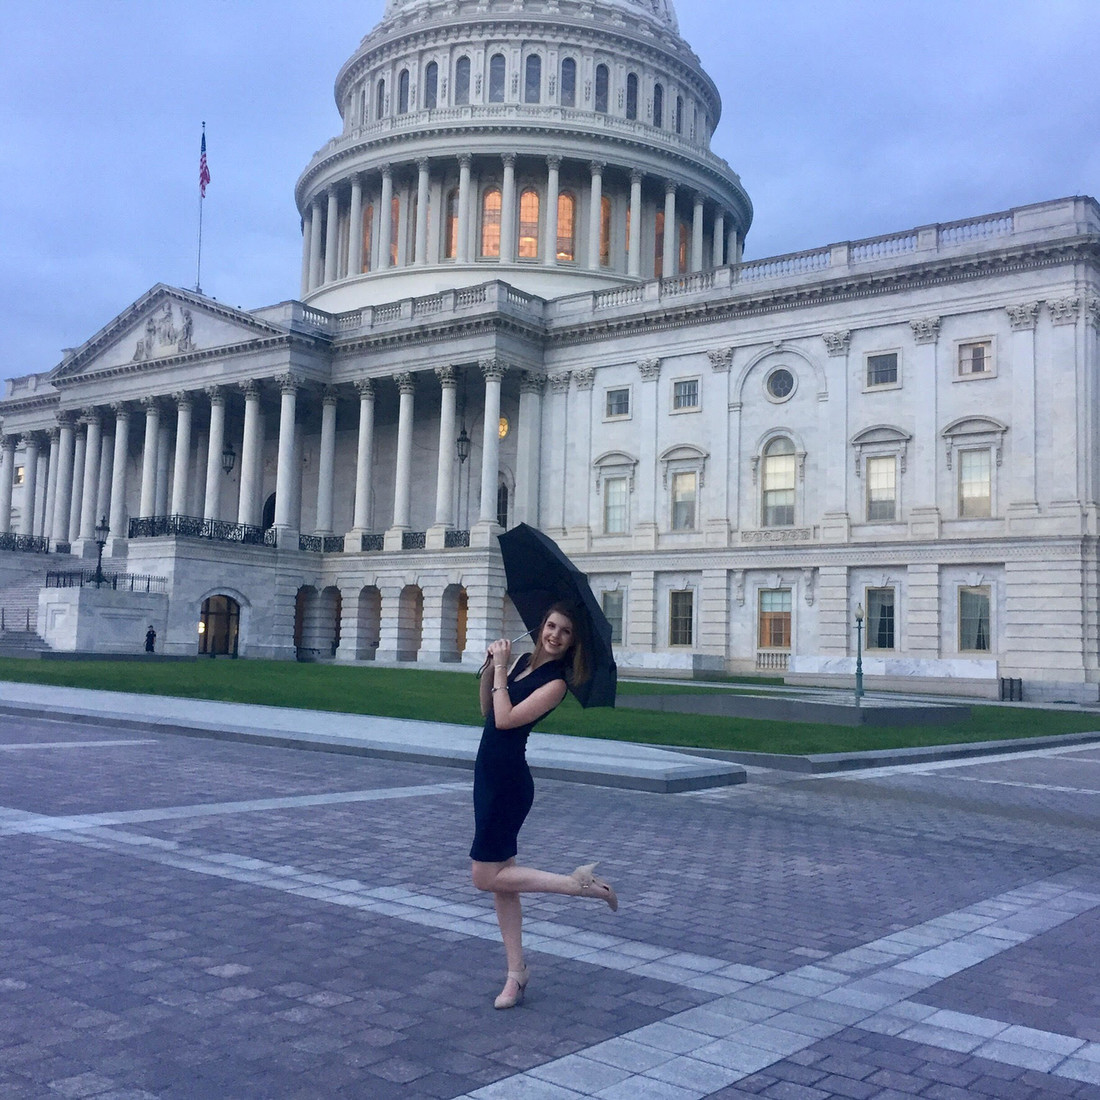 Madeleine Buchholz in front of the Capitol in Washington, D.C.